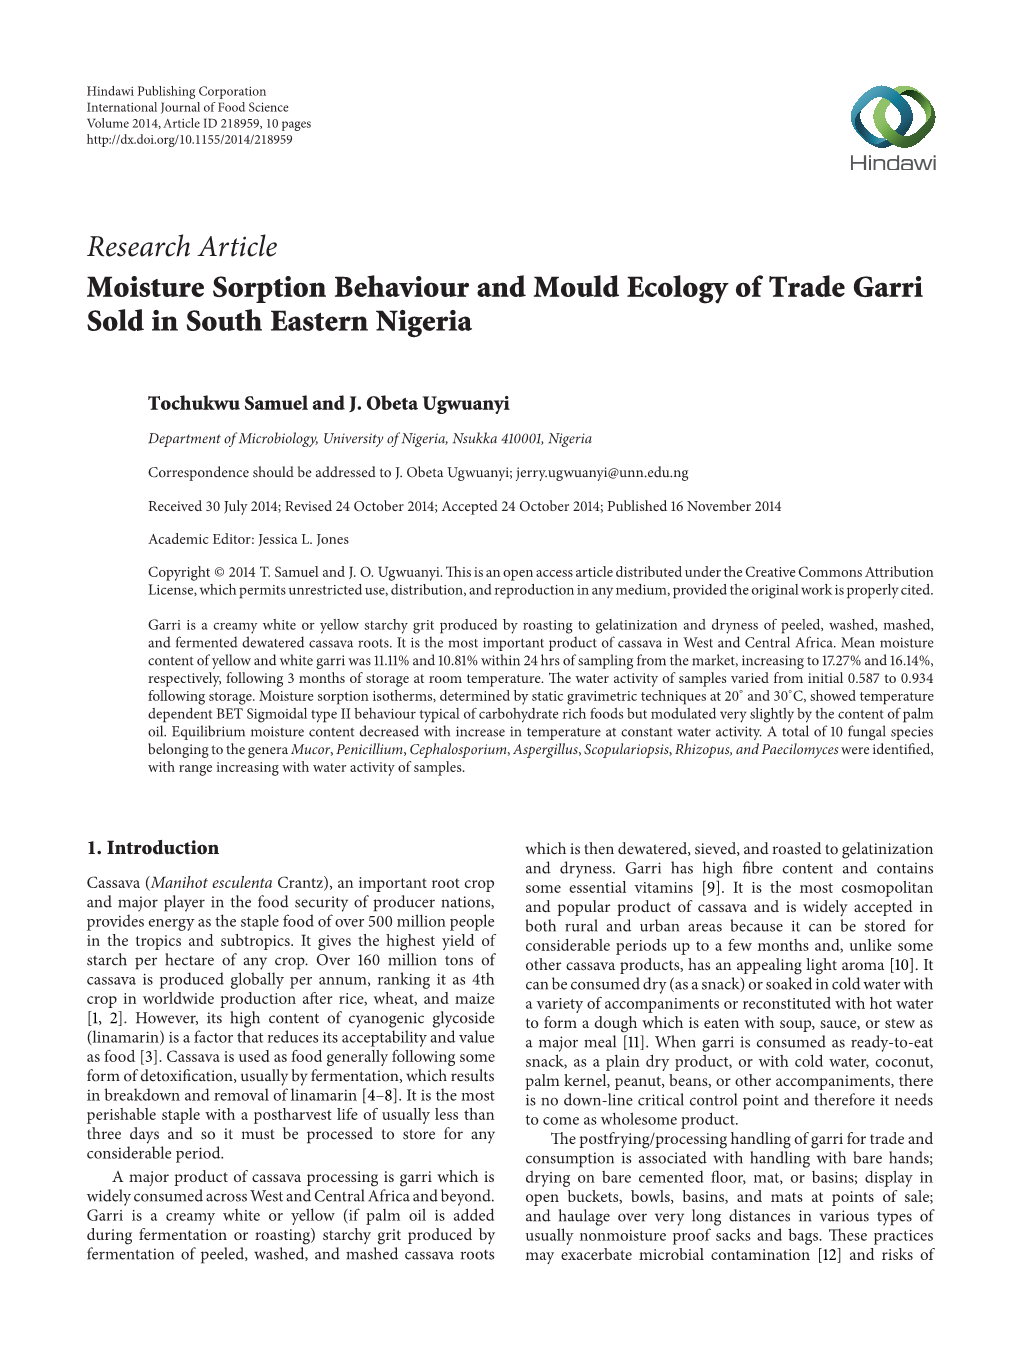 Research Article Moisture Sorption Behaviour and Mould Ecology of Trade Garri Sold in South Eastern Nigeria